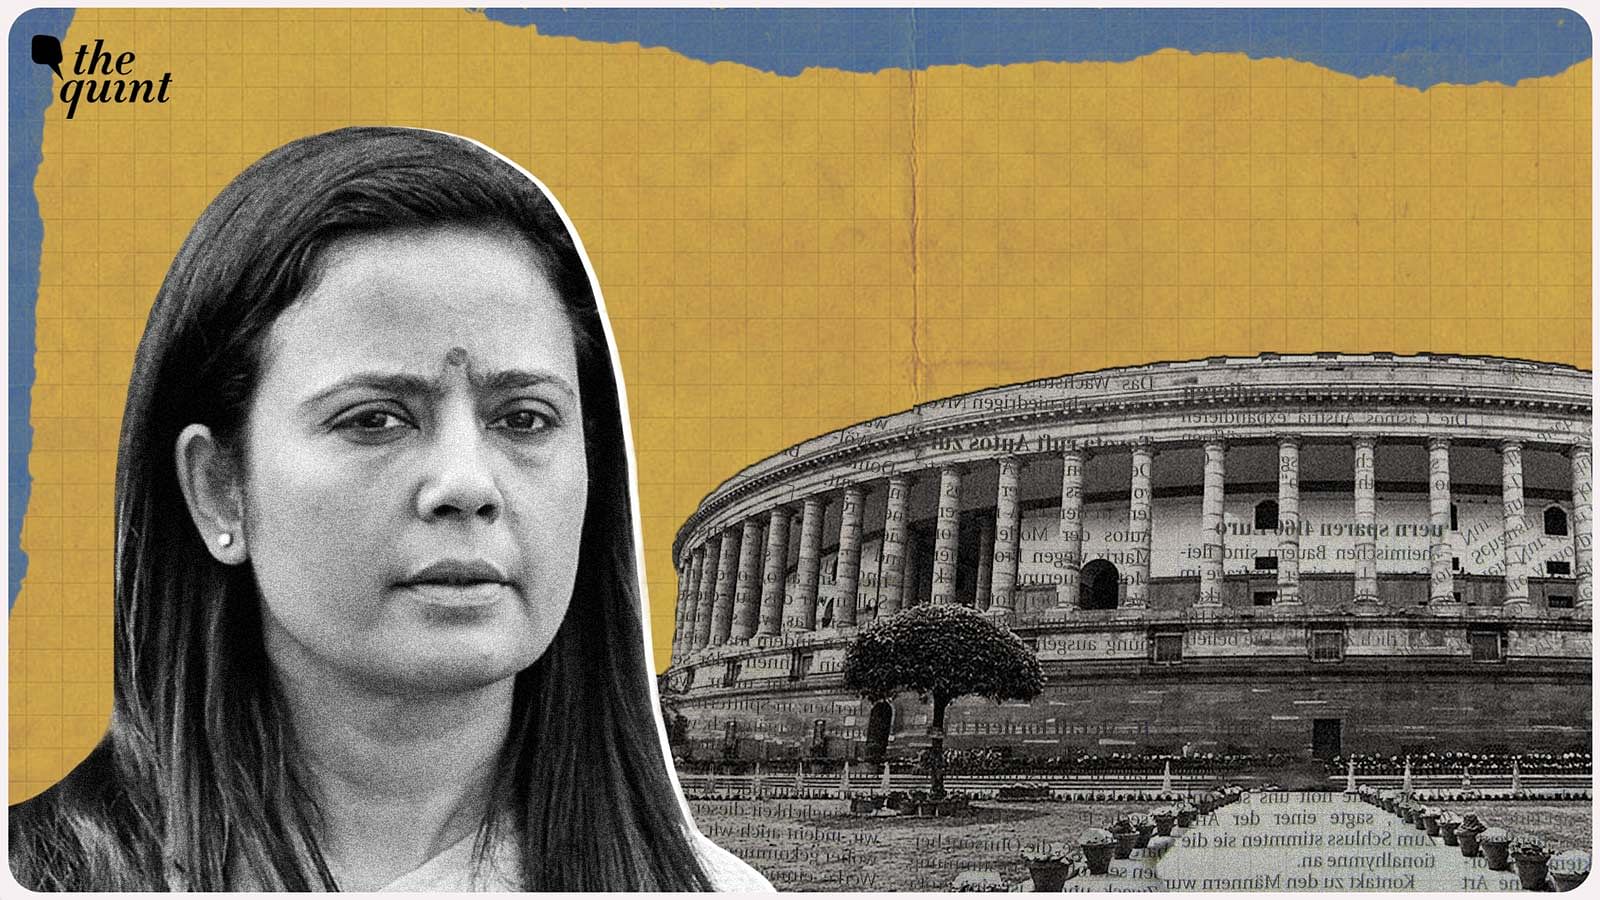 Cash-for-question row: Mahua Moitra to appear before Parliament's Ethics  Committee